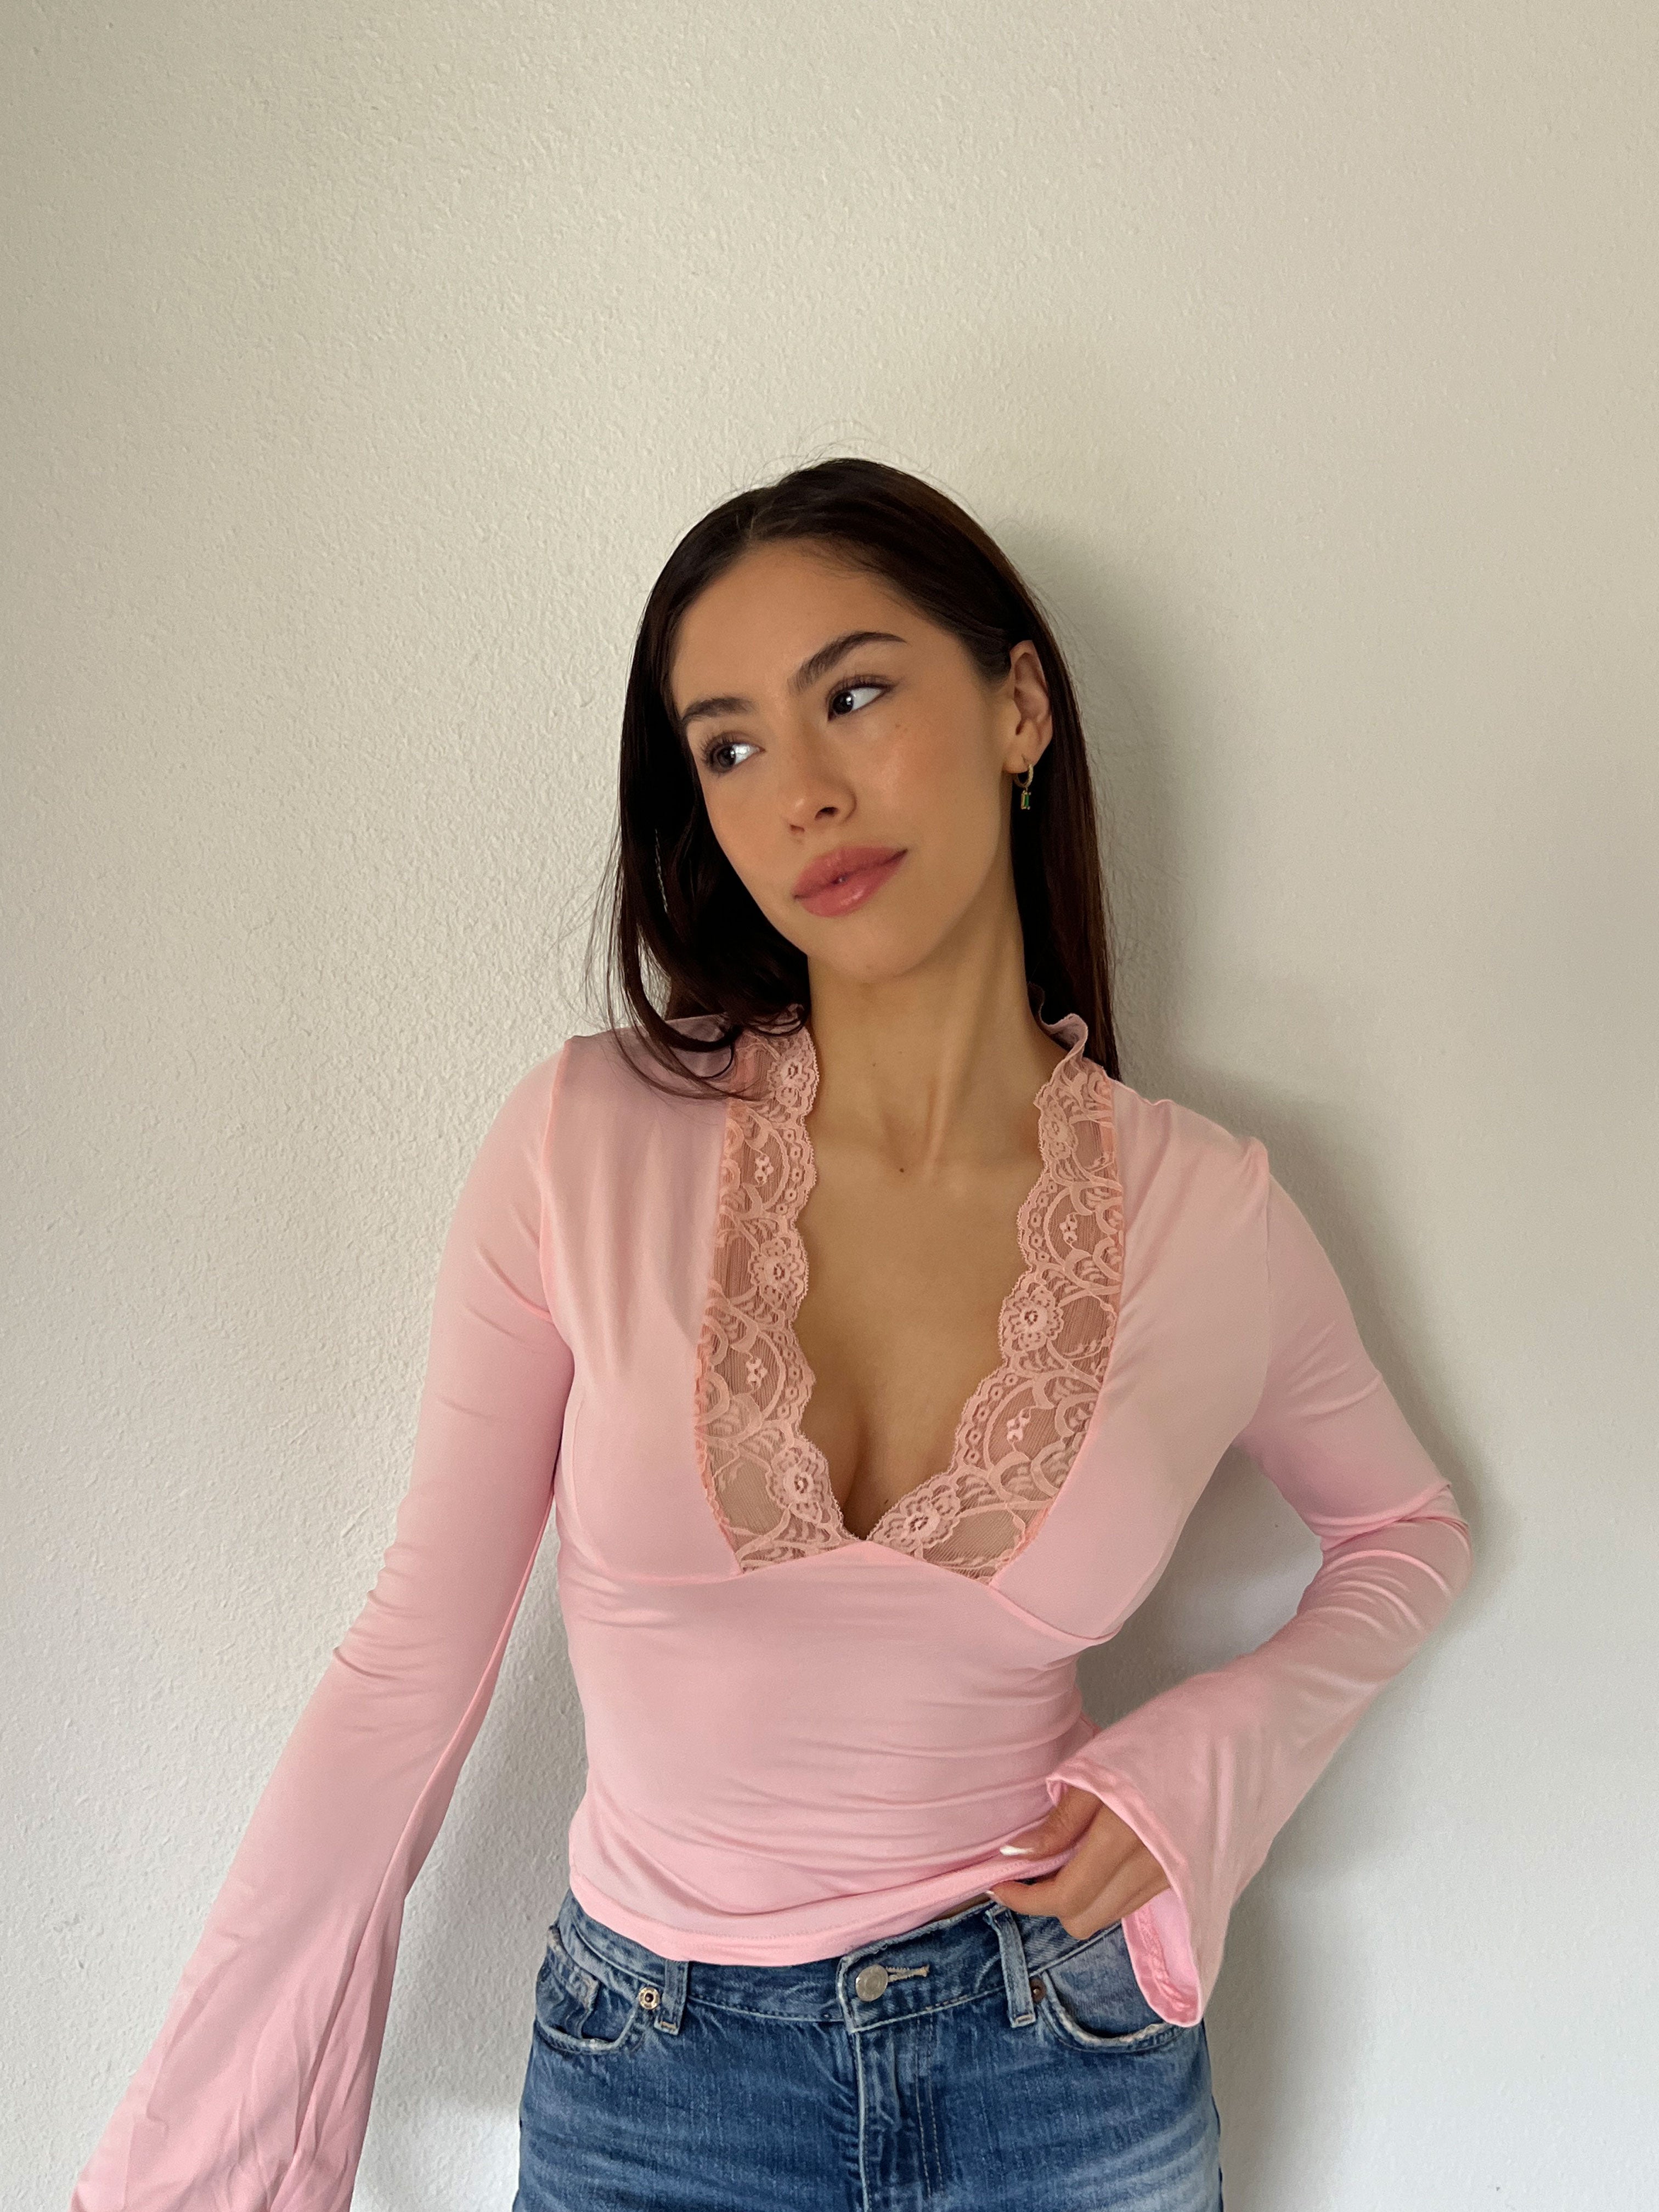 Veyles's Lace Top Perfect Fit Baby Pink